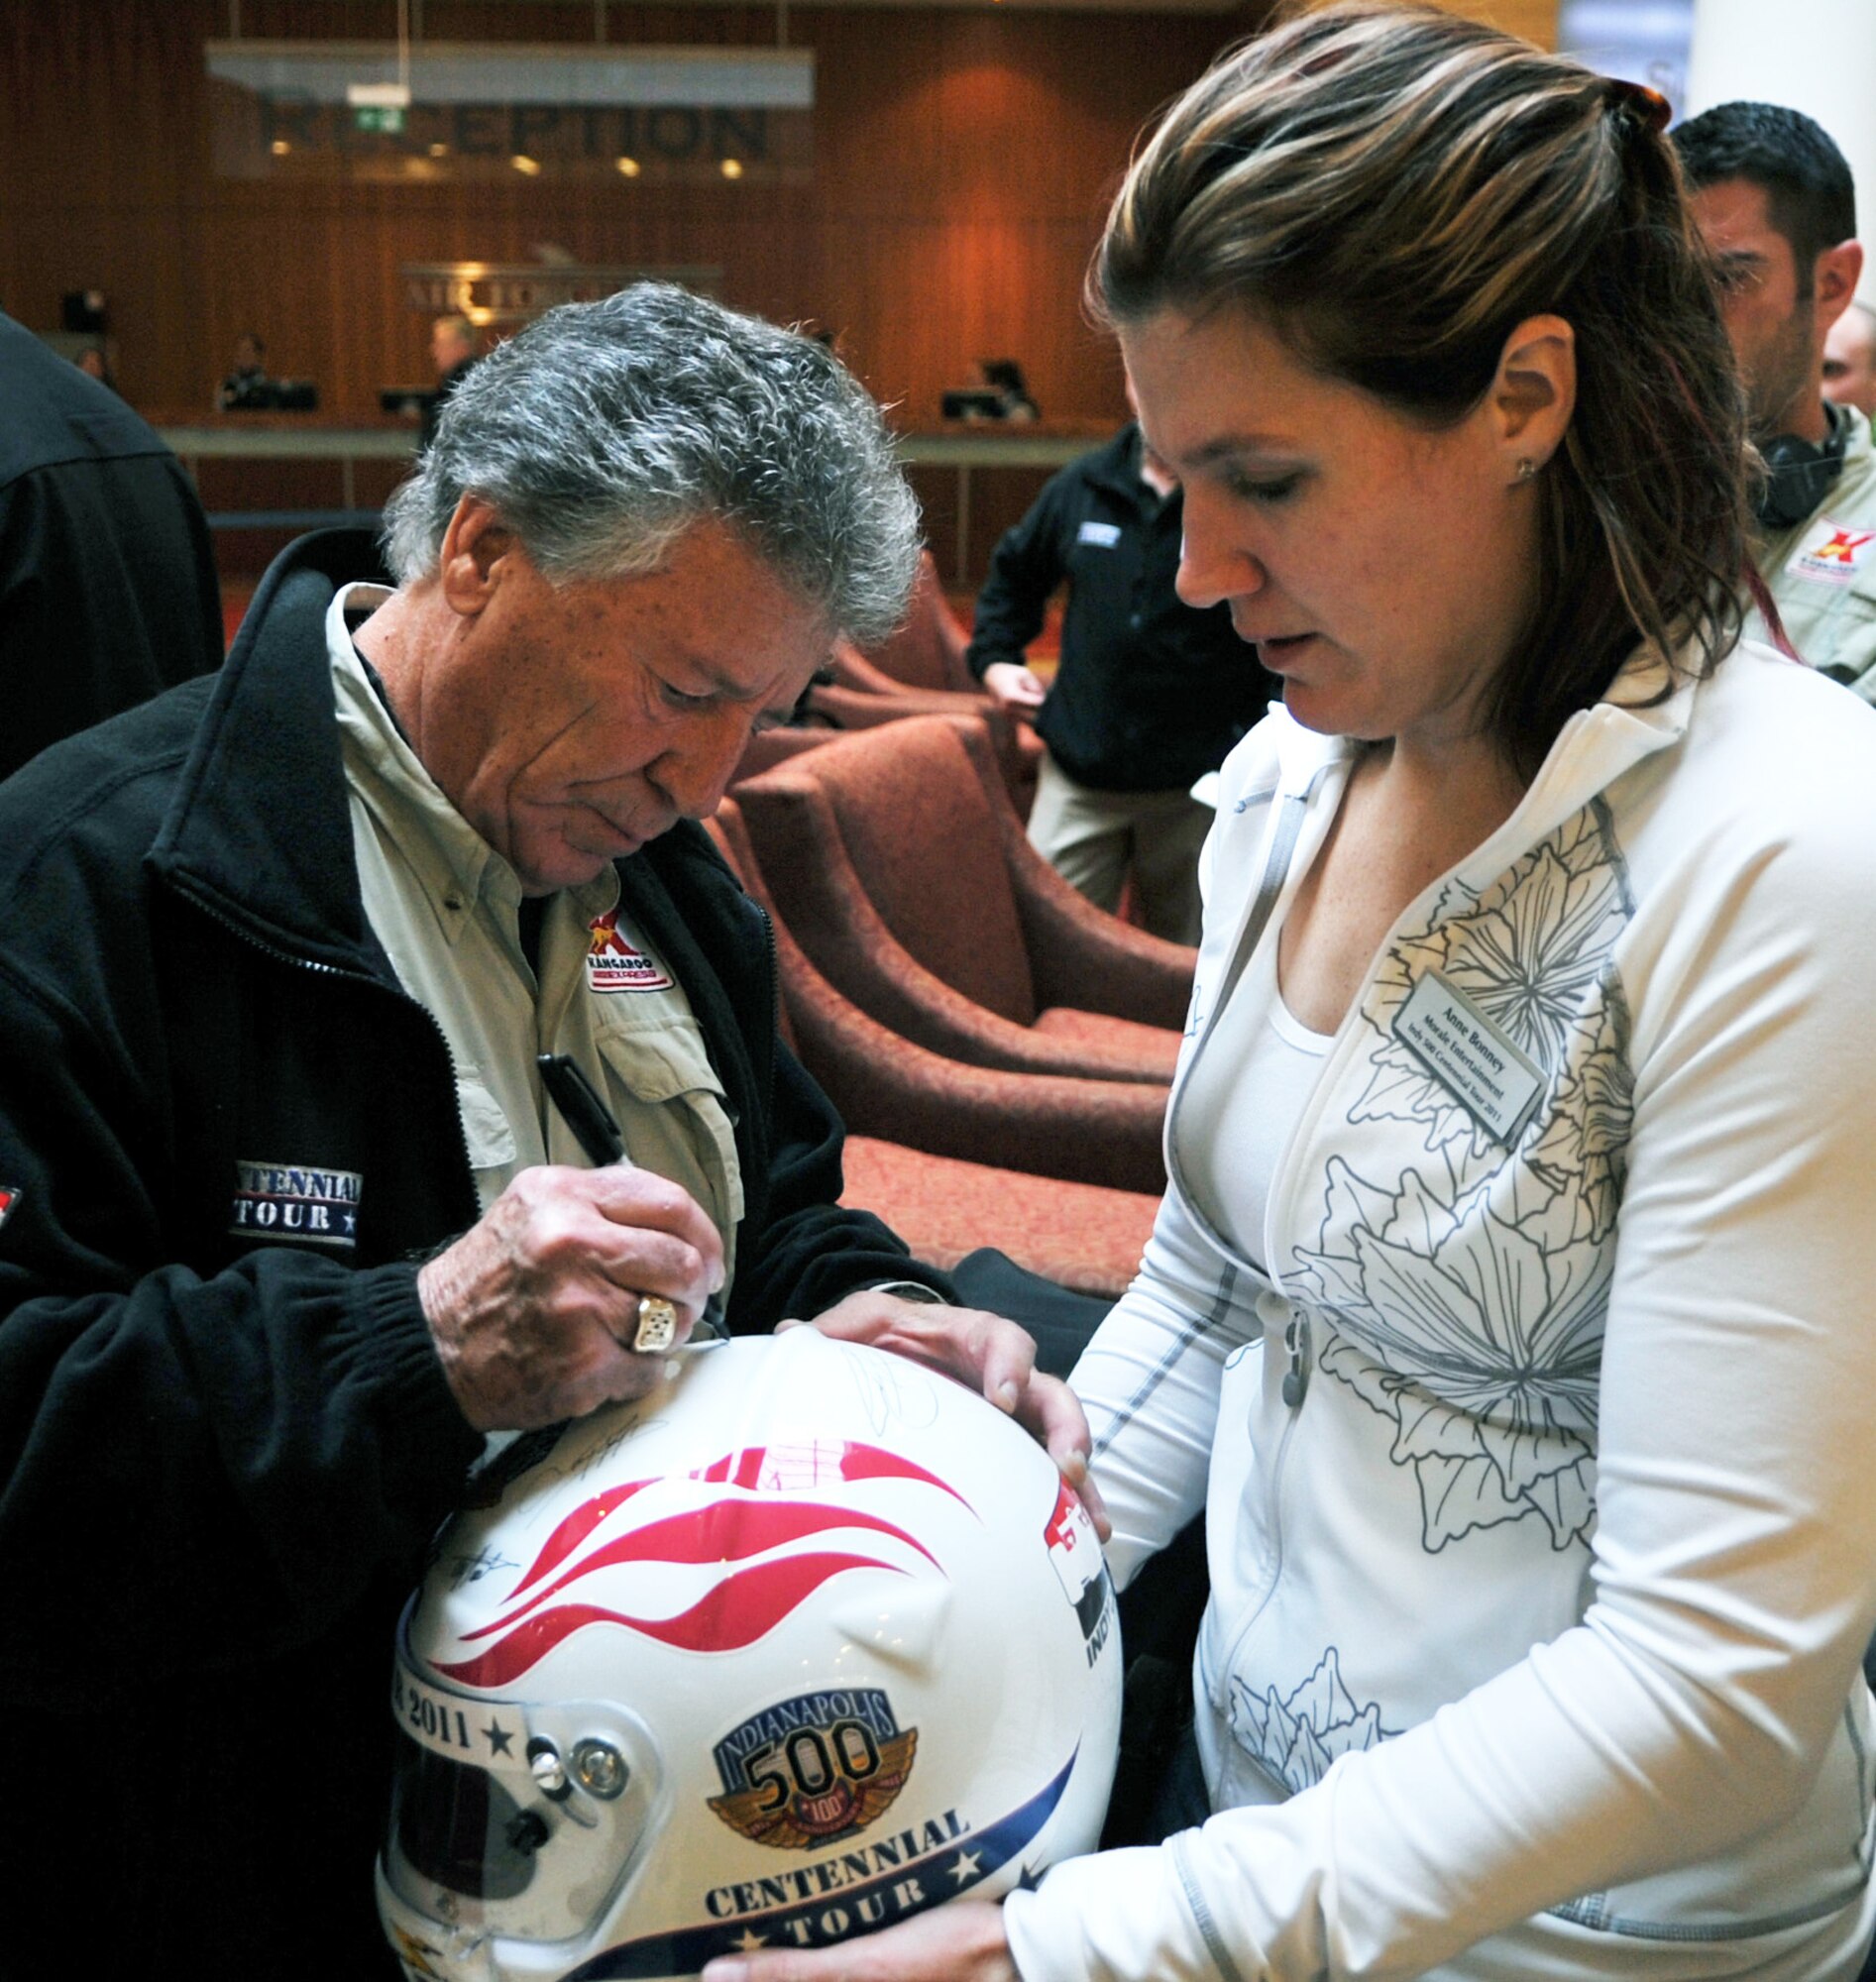 Mario Andretti, an Indy 500, Daytona 500, and Formula 1 champion, autographs a helmet during the Indy 500 Centennial Tour, Ramstein Air Base, Germany, Jan. 14, 2011. The Indy 500 Centennial tour brings Indy racing teams to Europe and the Middle East over a 10 day tour to honor and boost morale for service members and their families. (U.S. Air Force photo by Senior Airman Caleb Pierce)